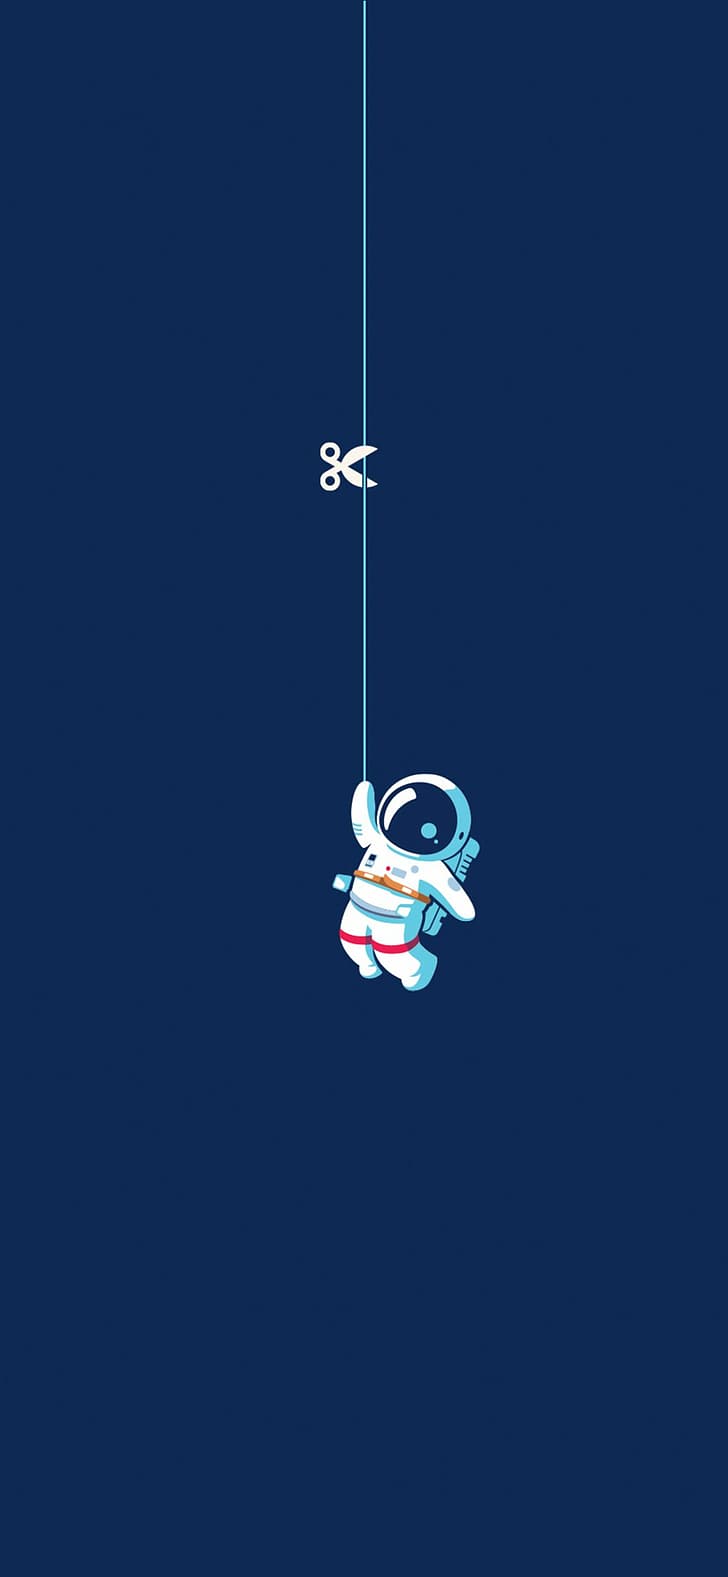 30x900px Free Download Hd Wallpaper Vertical Astronaut Scissors Simple Background Blue Background Wallpaper Flare